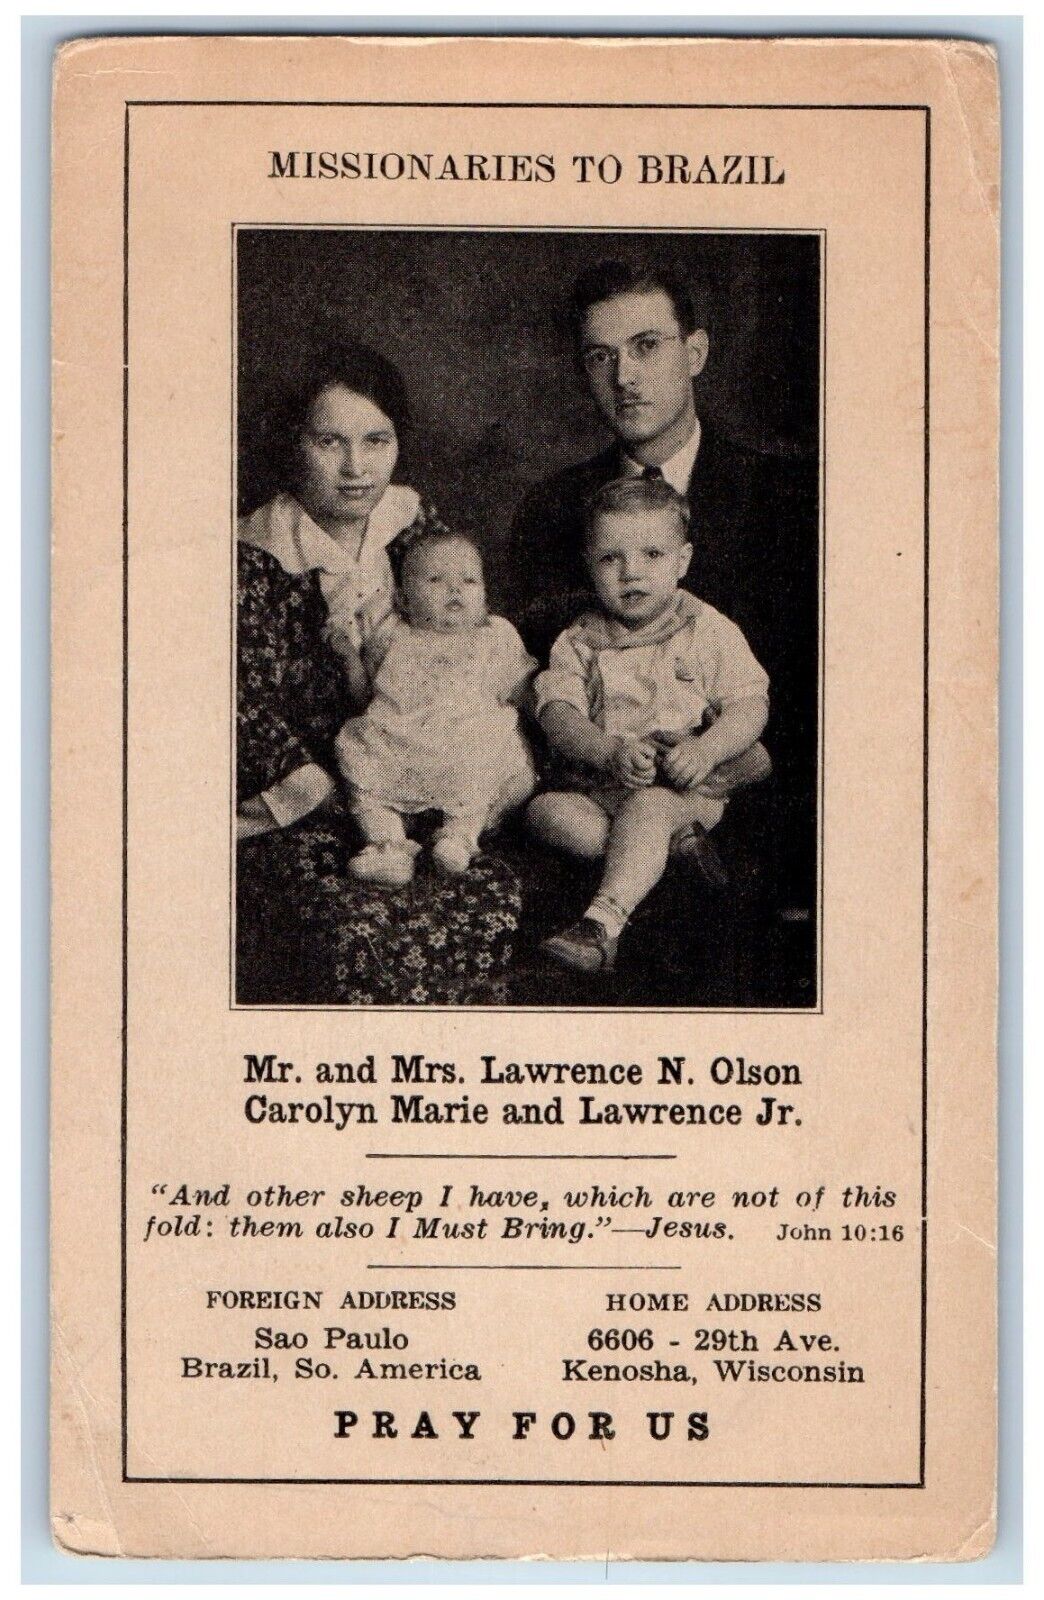 Missionaries To Brazil Postcard Mr. And Mrs. Lawrence N Olson Carolyn Marie